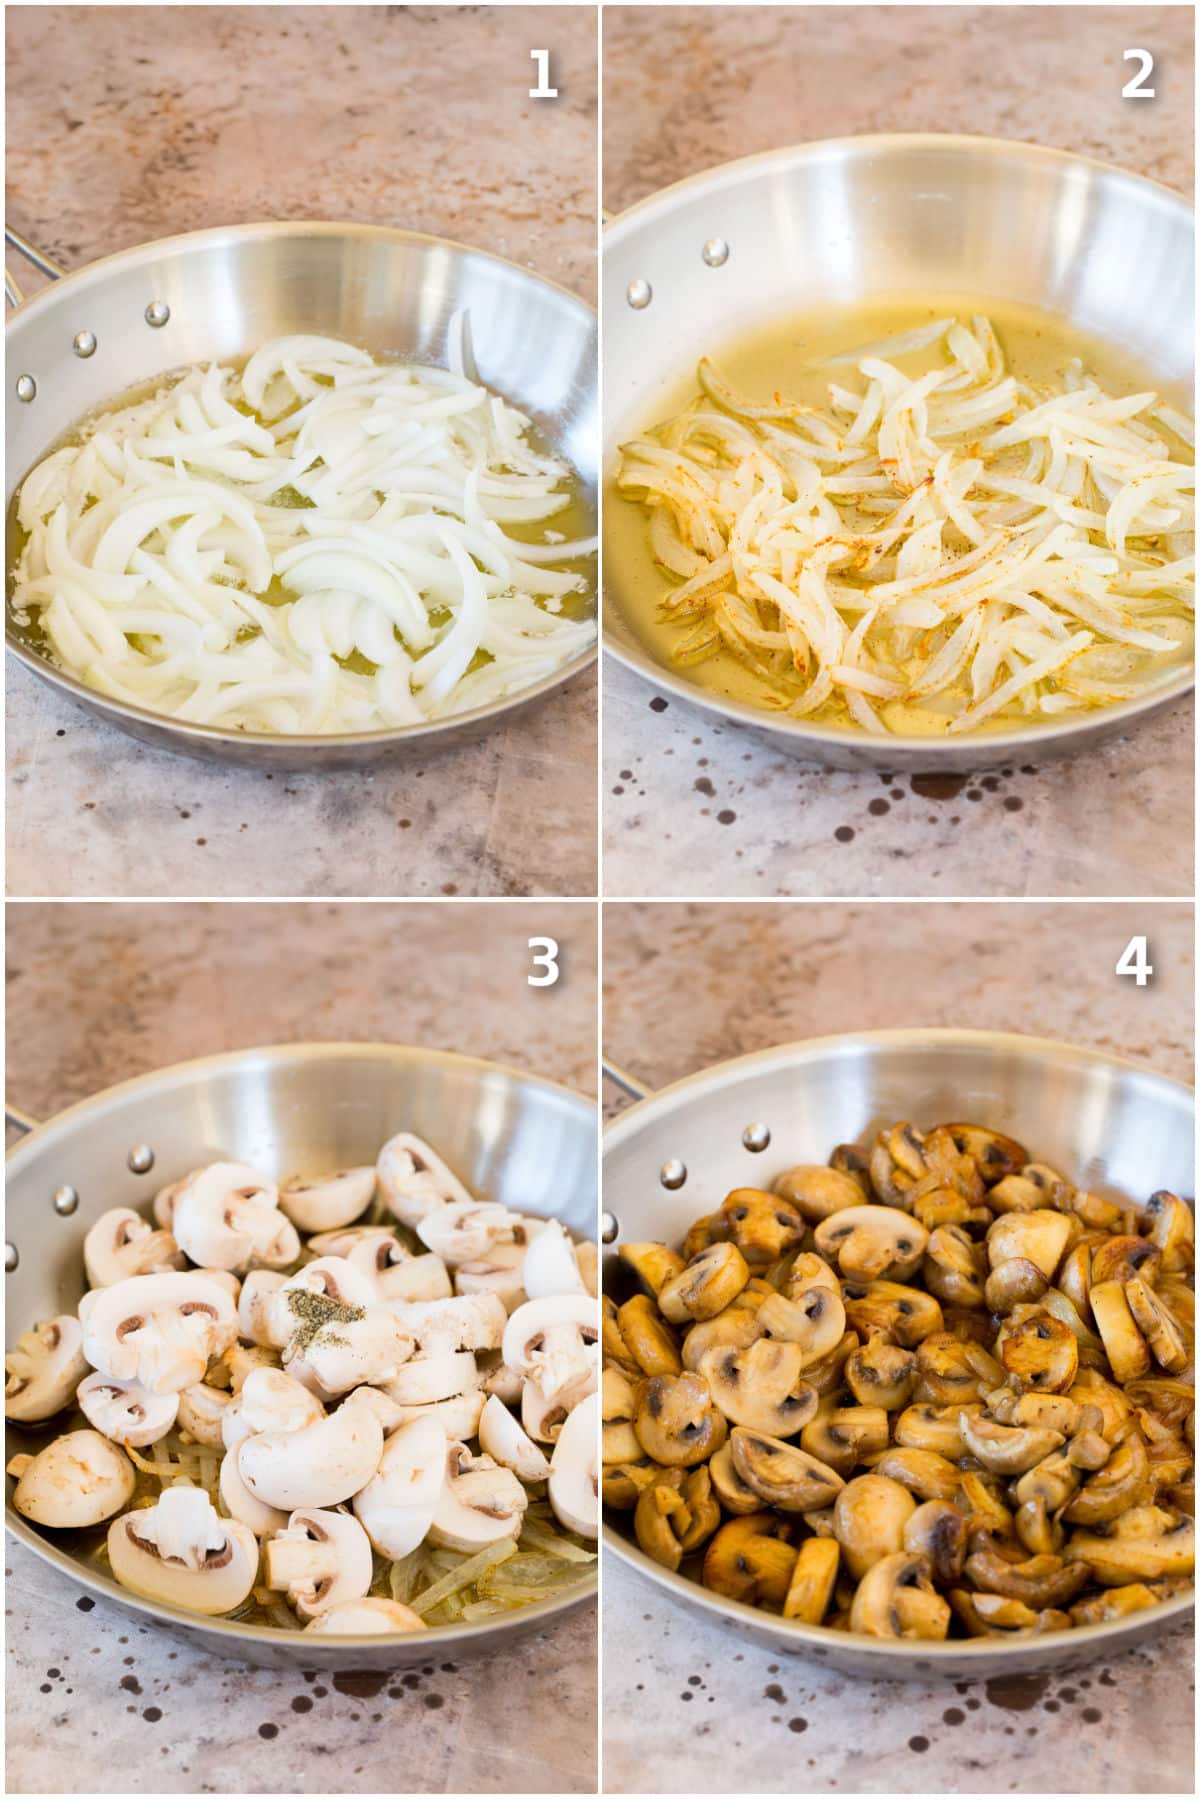 Step by step process shots showing how to cook onions and mushrooms.